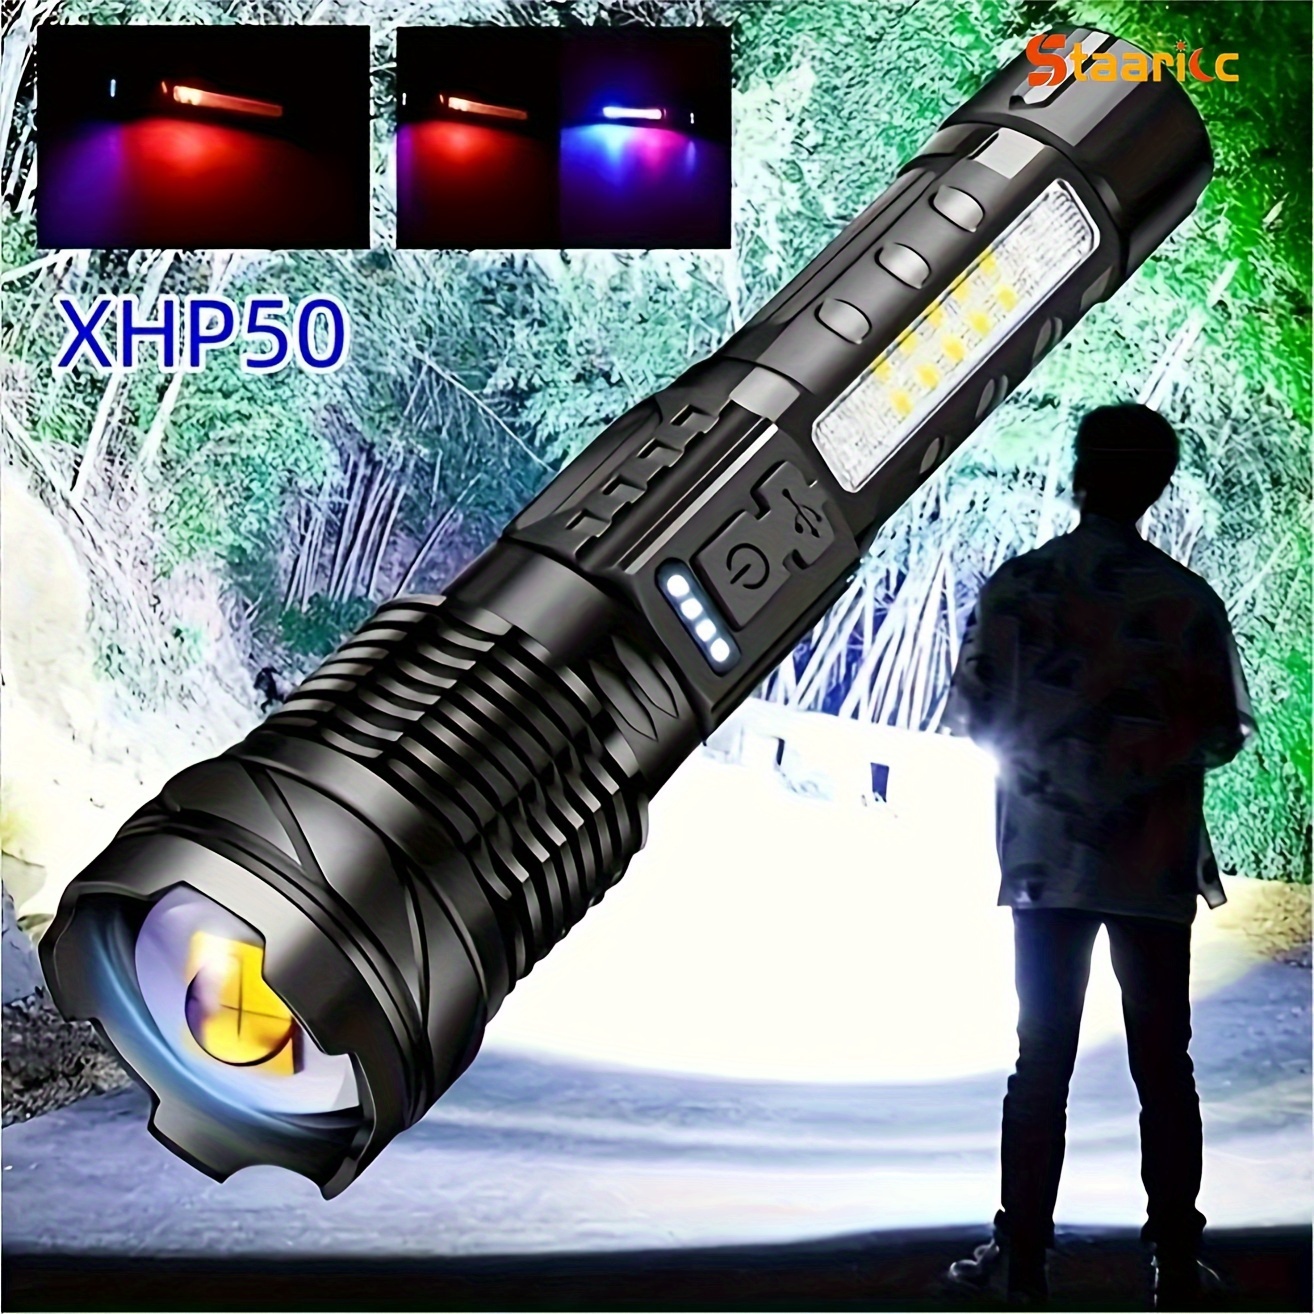 

1pc Staaricc Super Strong Rechargeable Flashlight, Flood Light For Outdoor Camping, Fishing, Hunting, Climbing, Adventure Emergency, Hiking